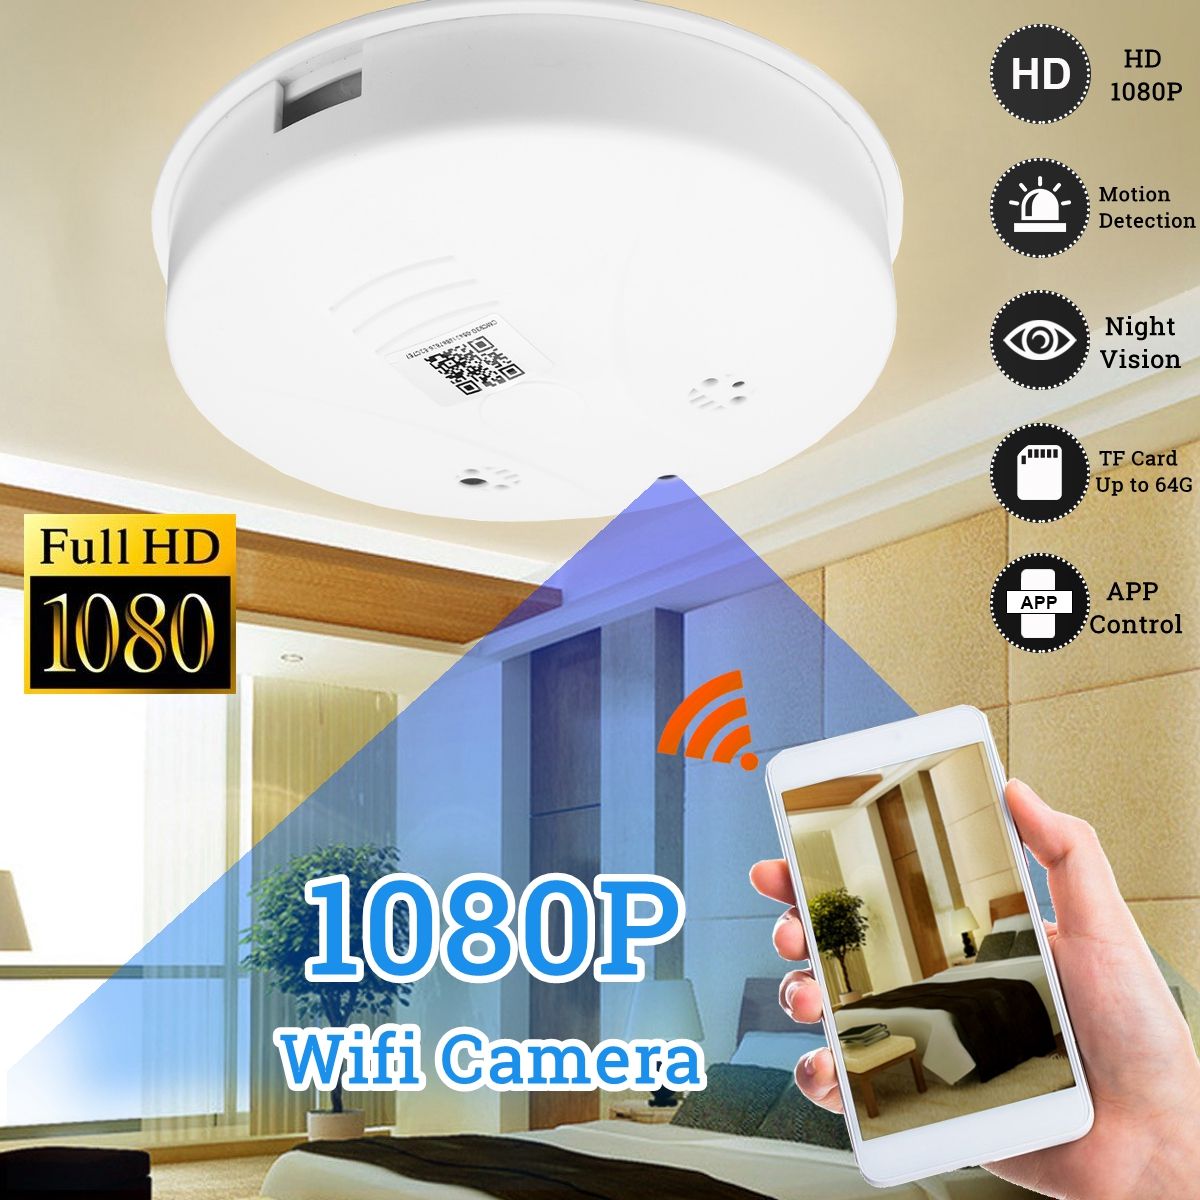 1080P-36mm-Lens-Super-Clear-Wired-Wireless-Security-Wifi-IP-Camera-Smart-Home-Video-System-1424558